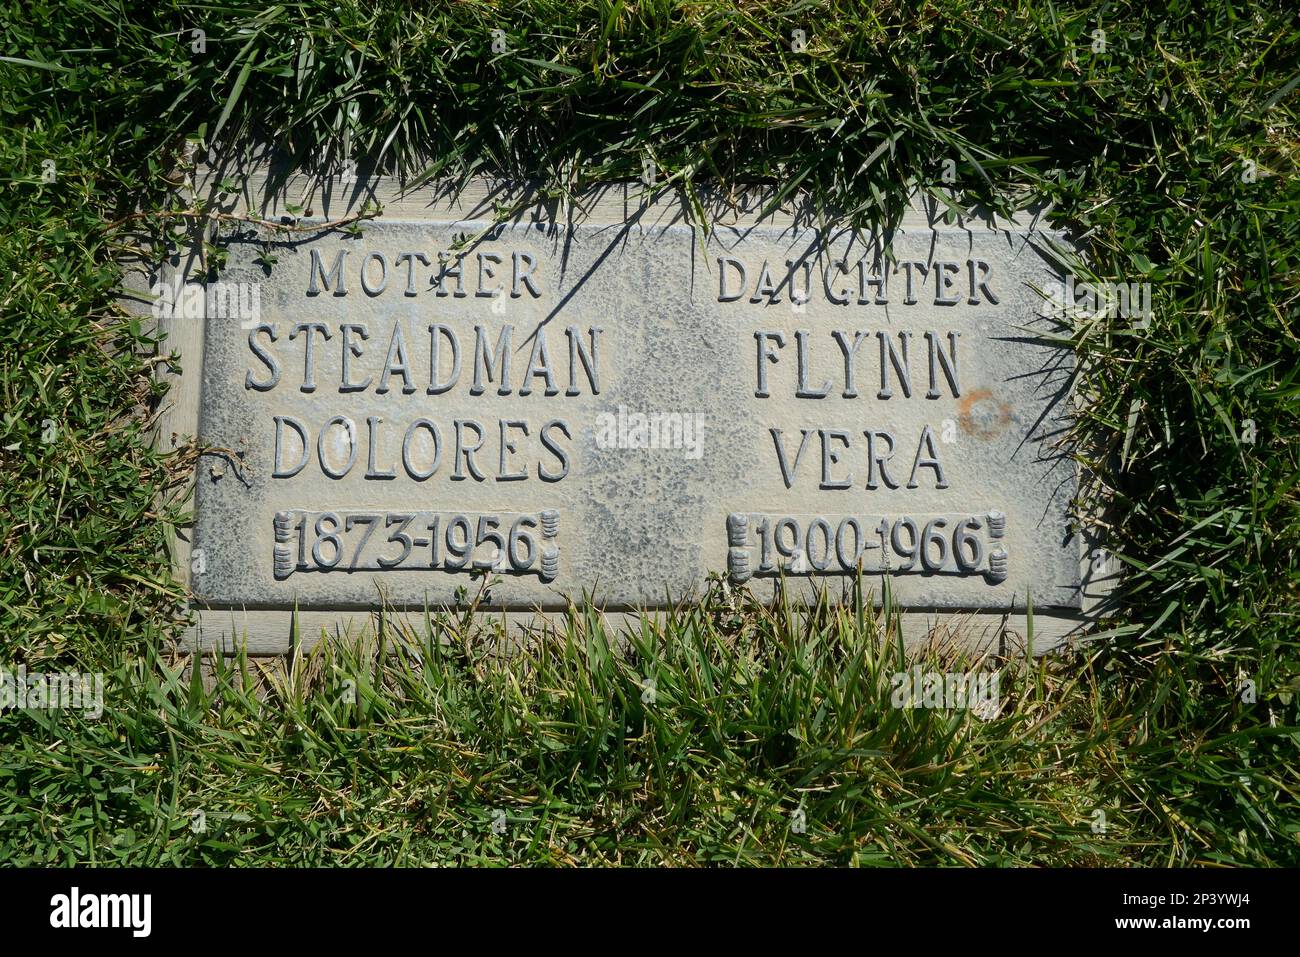 Long Beach, California, USA 2nd March 2023 Actress Vera Steadman's Grave in Erica Section at Forest Lawn Long Beach Memorial Park Cemetery on March 2, 2023 in Long Beach, California, USA. Photo by Barry King/Alamy Stock Photo Stock Photo